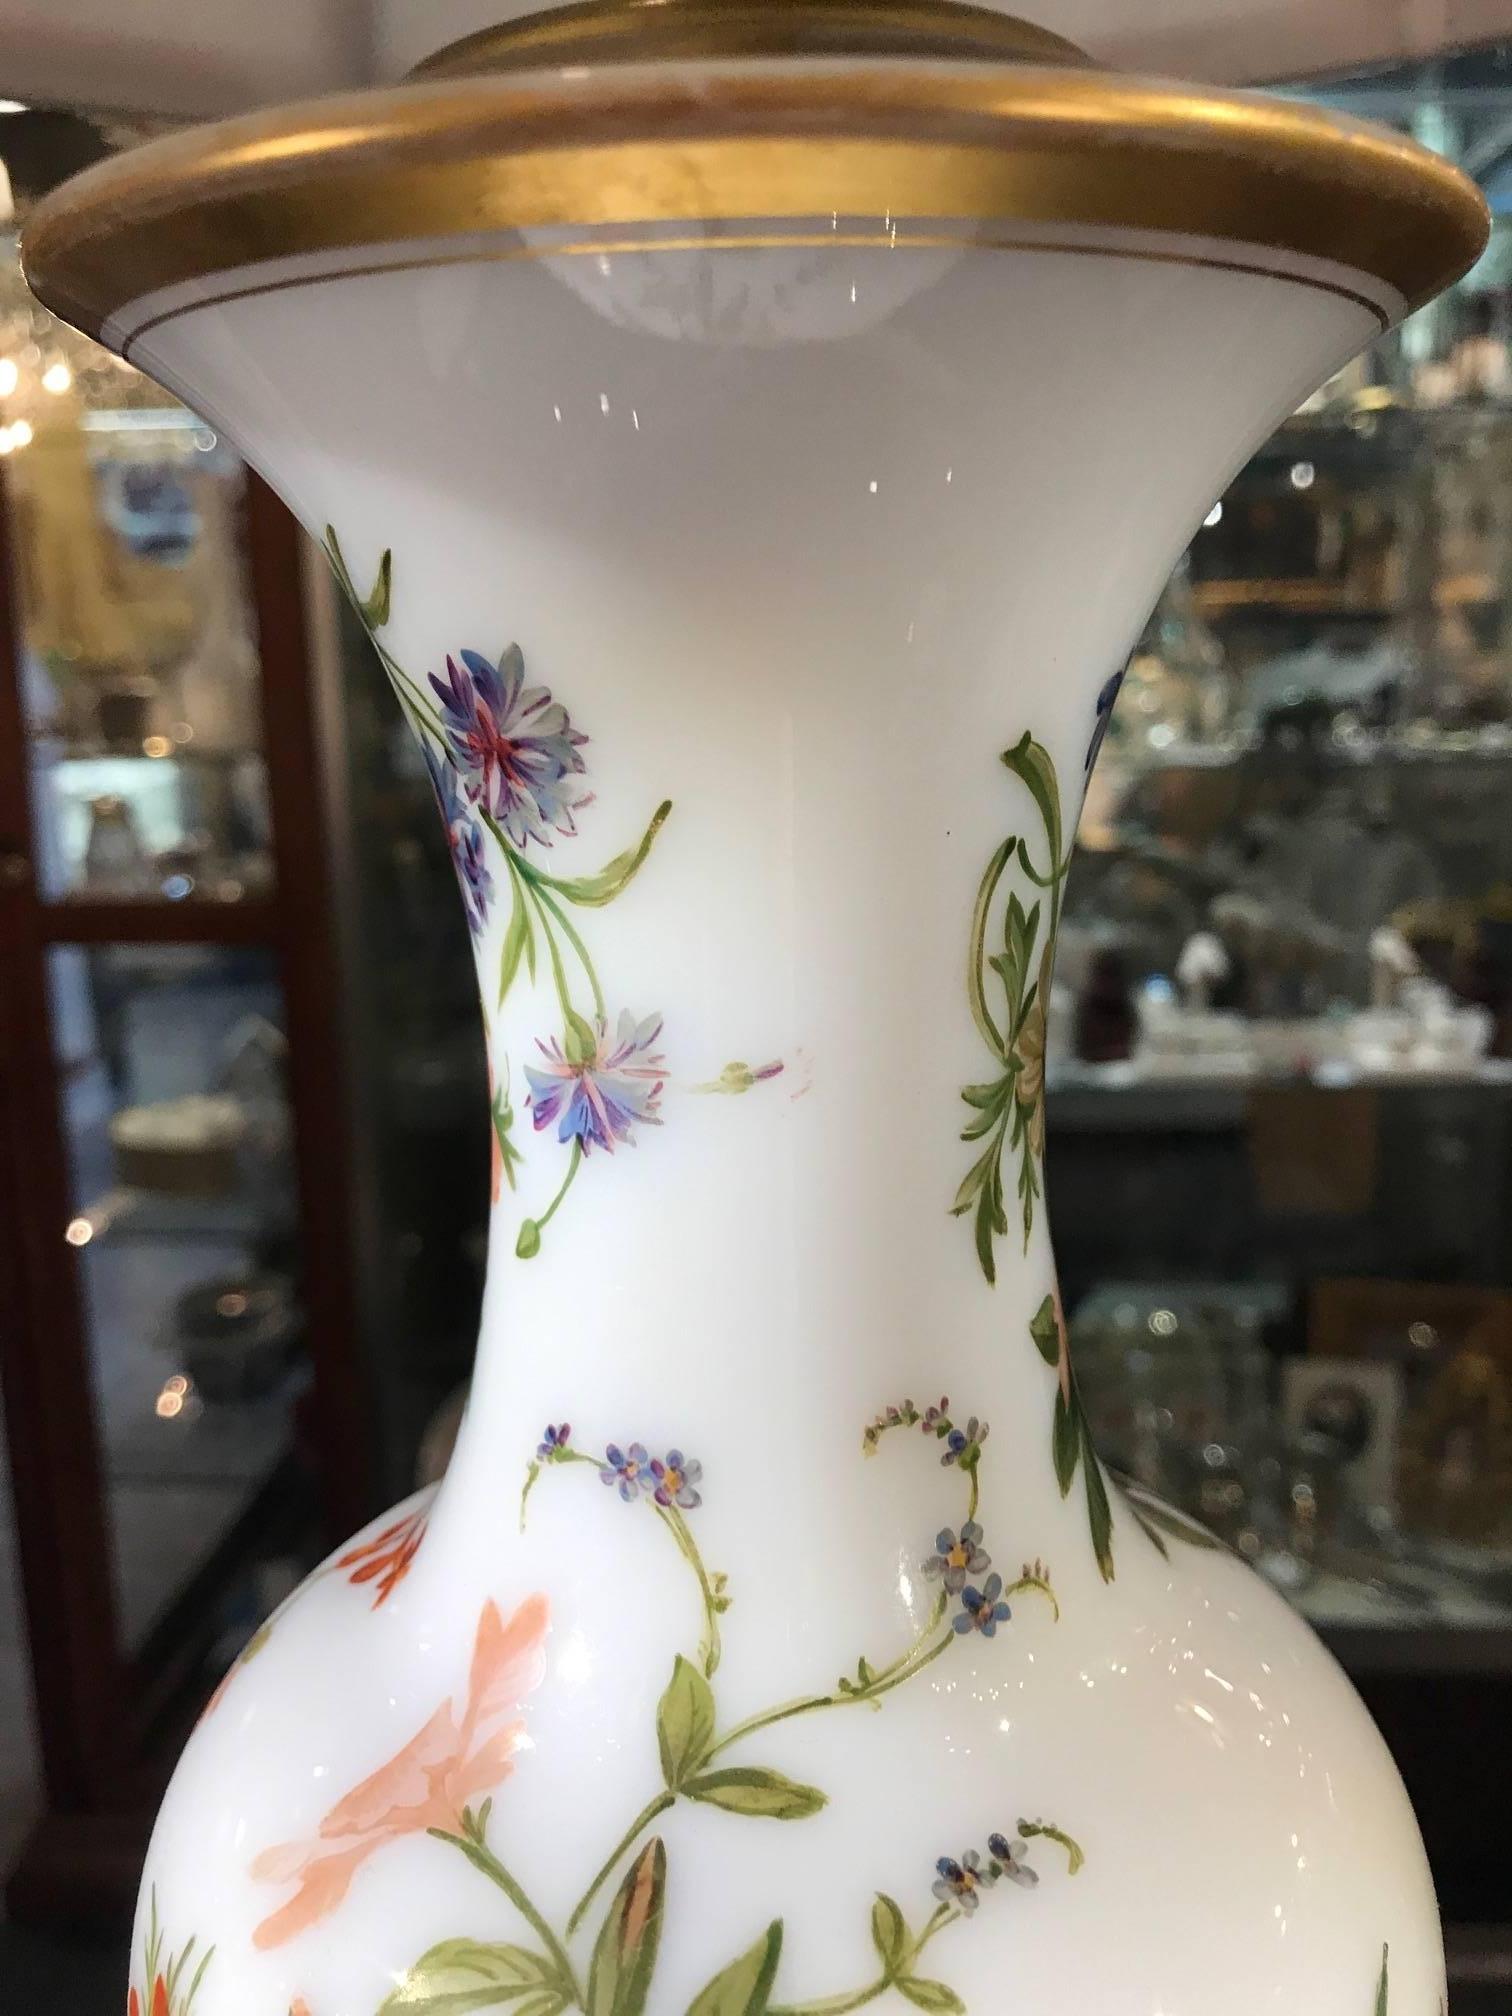 Hand-Painted French Opaline Enamel Painted Vase Lamp by Jean-Francois Robert, Baccarat, 1840